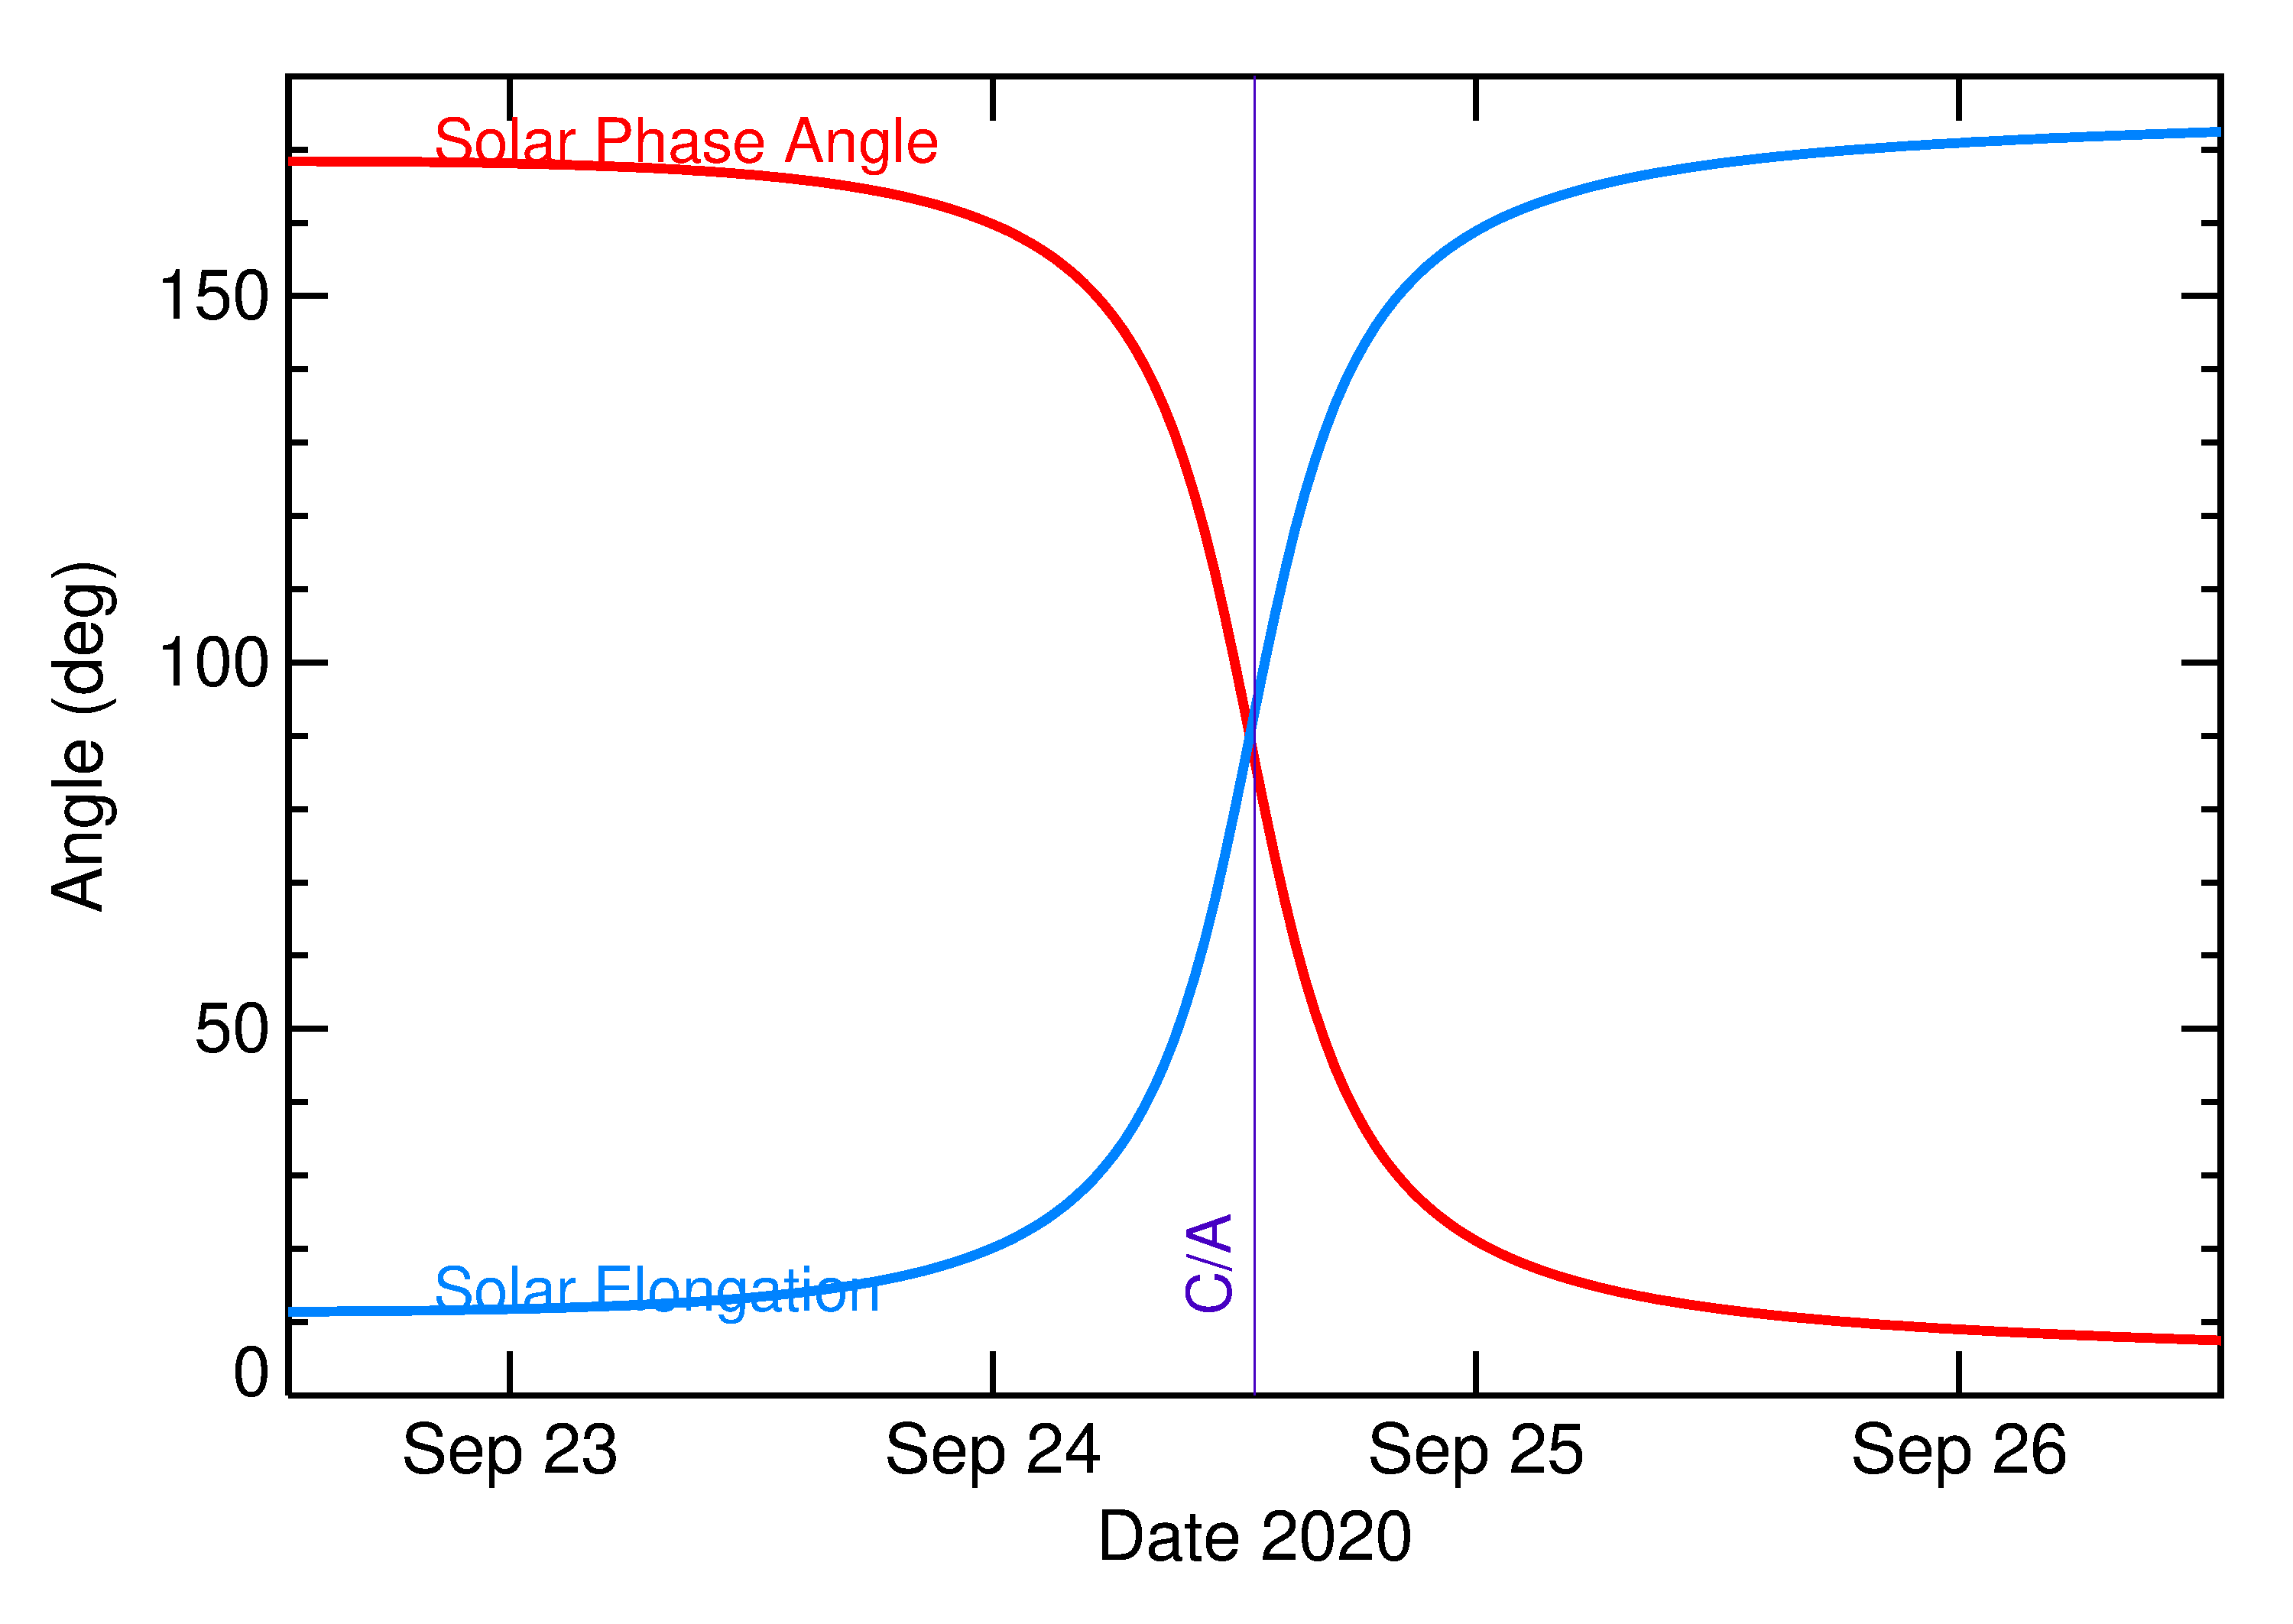 Solar Elongation and Solar Phase Angle of 2020 SN5 in the days around closest approach